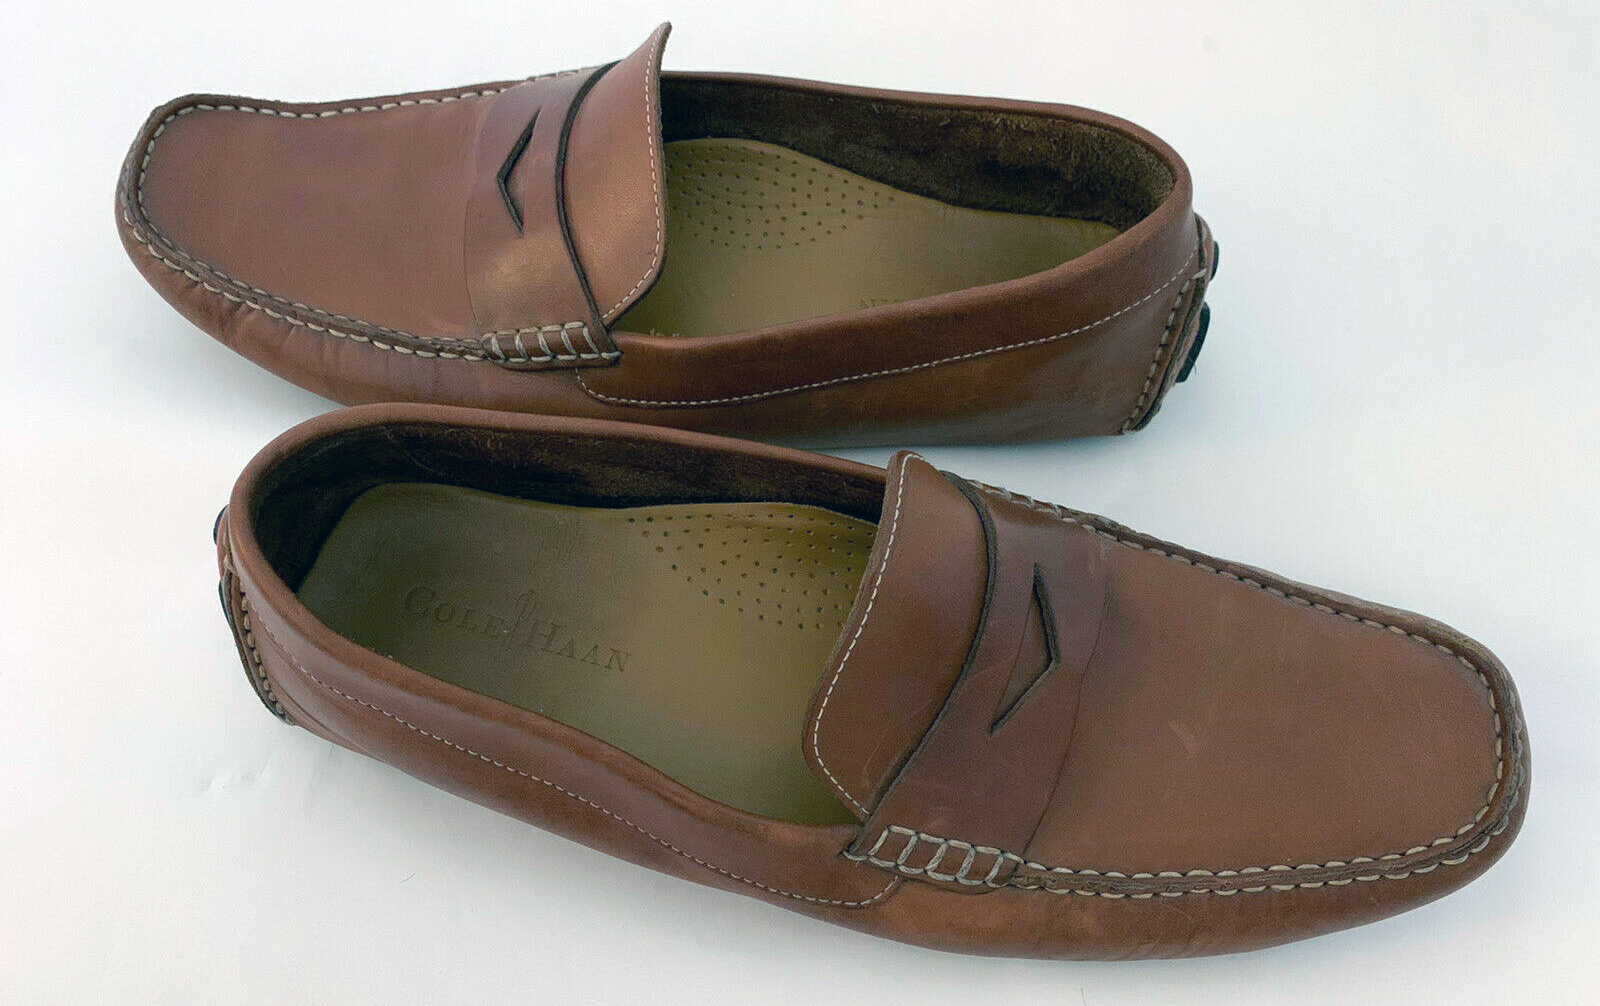 These tan leather Cole Haan size 12 M driving loafers were offered pre-owned for $40.